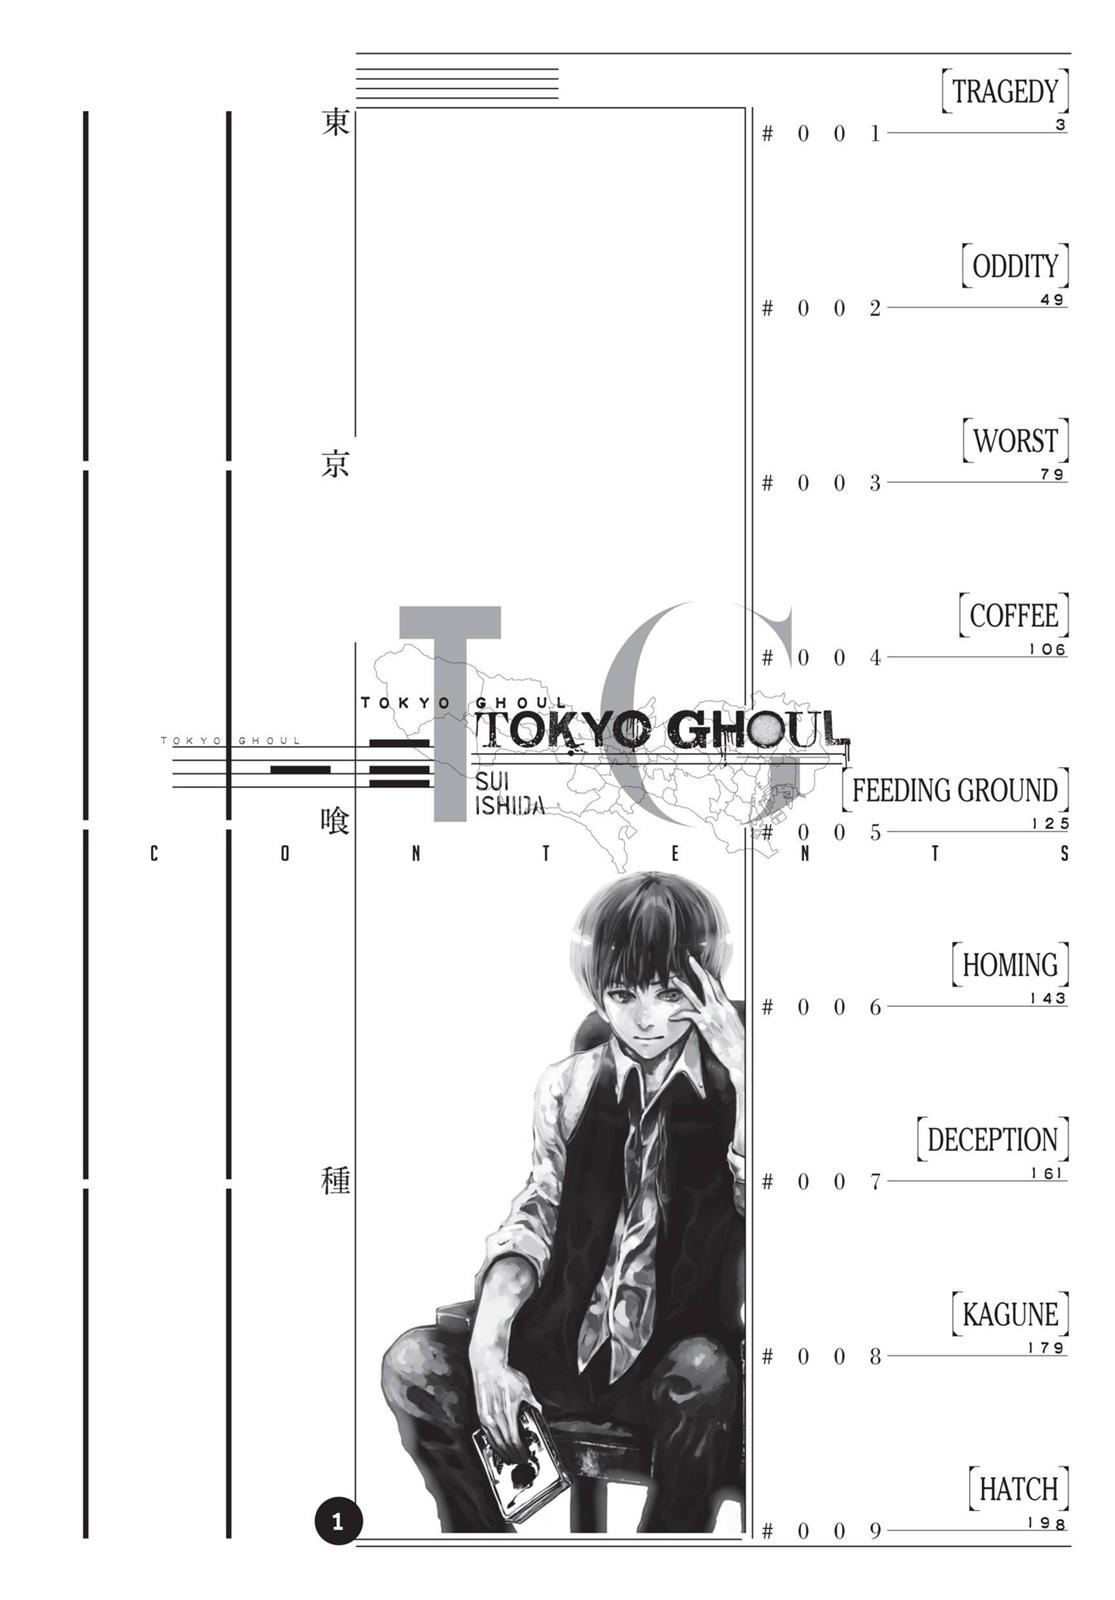 Tokyo Ghoul Vol. 1 Chapter 1: Tragedy - Picture 3